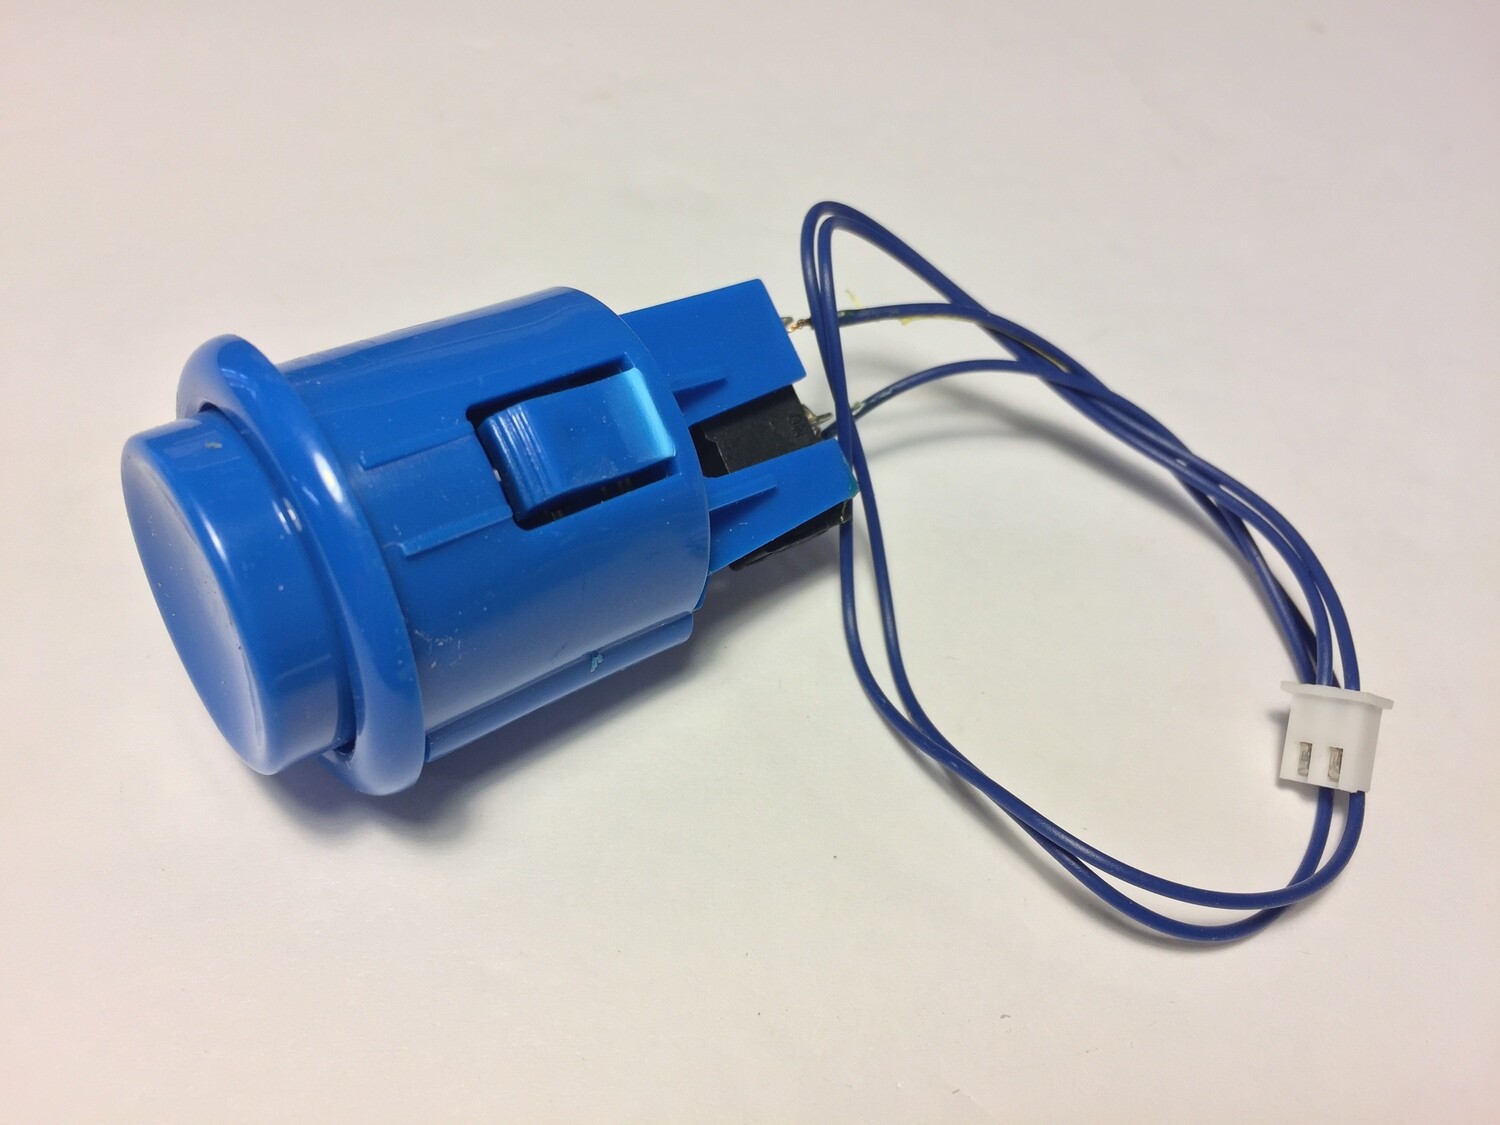 Blue Push Button (ARCADE1UP OEM PART) - Like New Condition